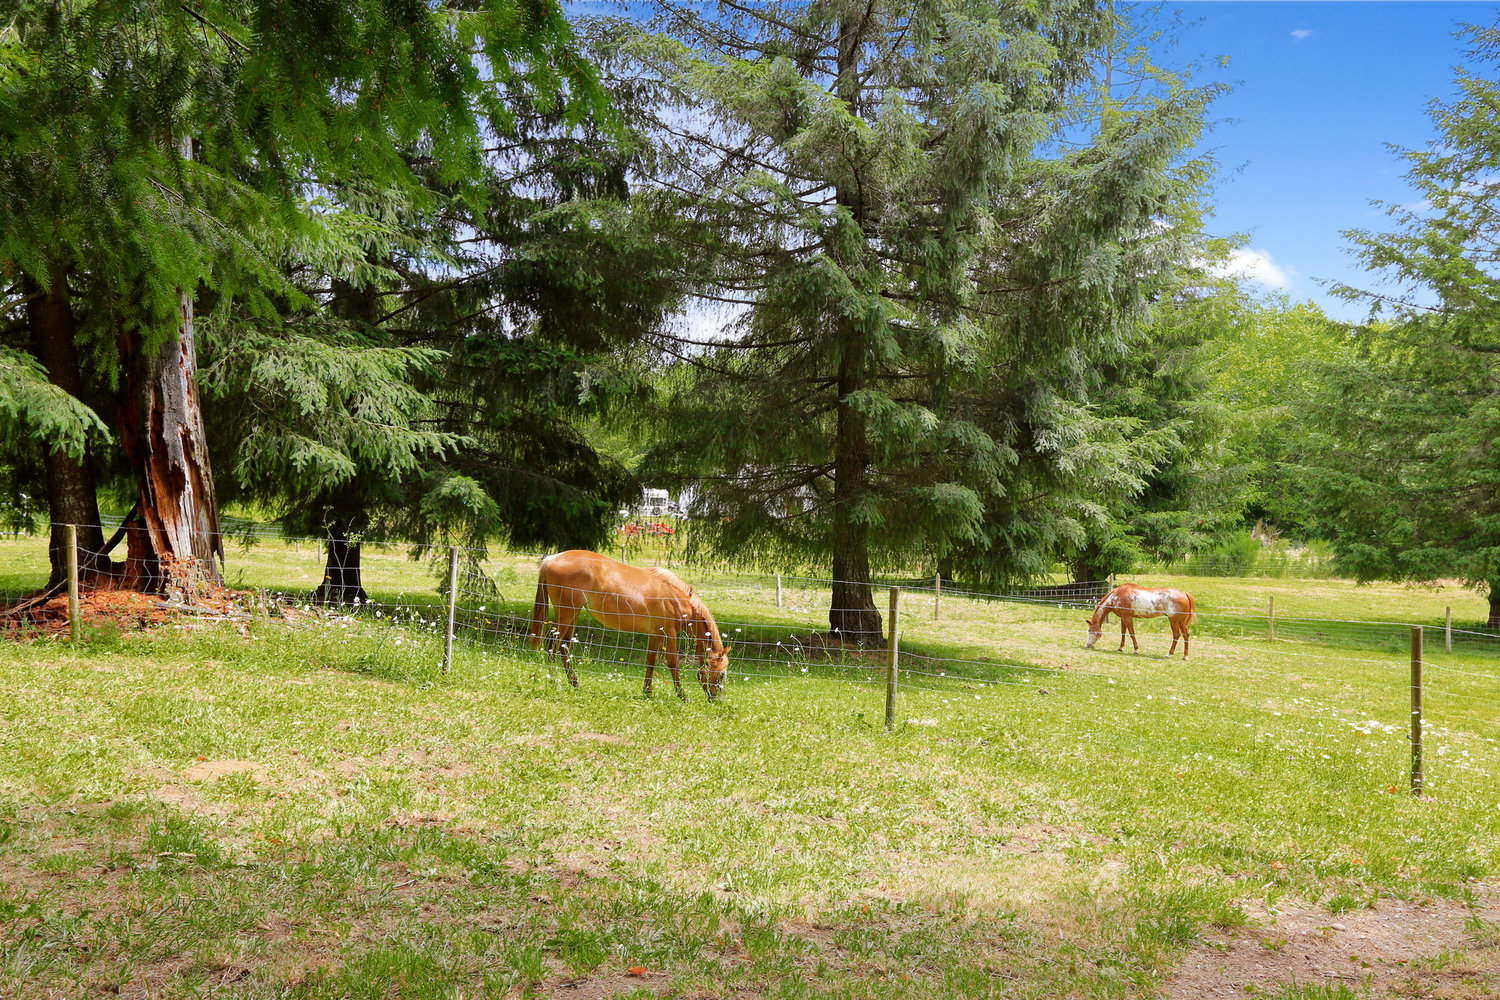 Photo of horses on a farm in Olympia.